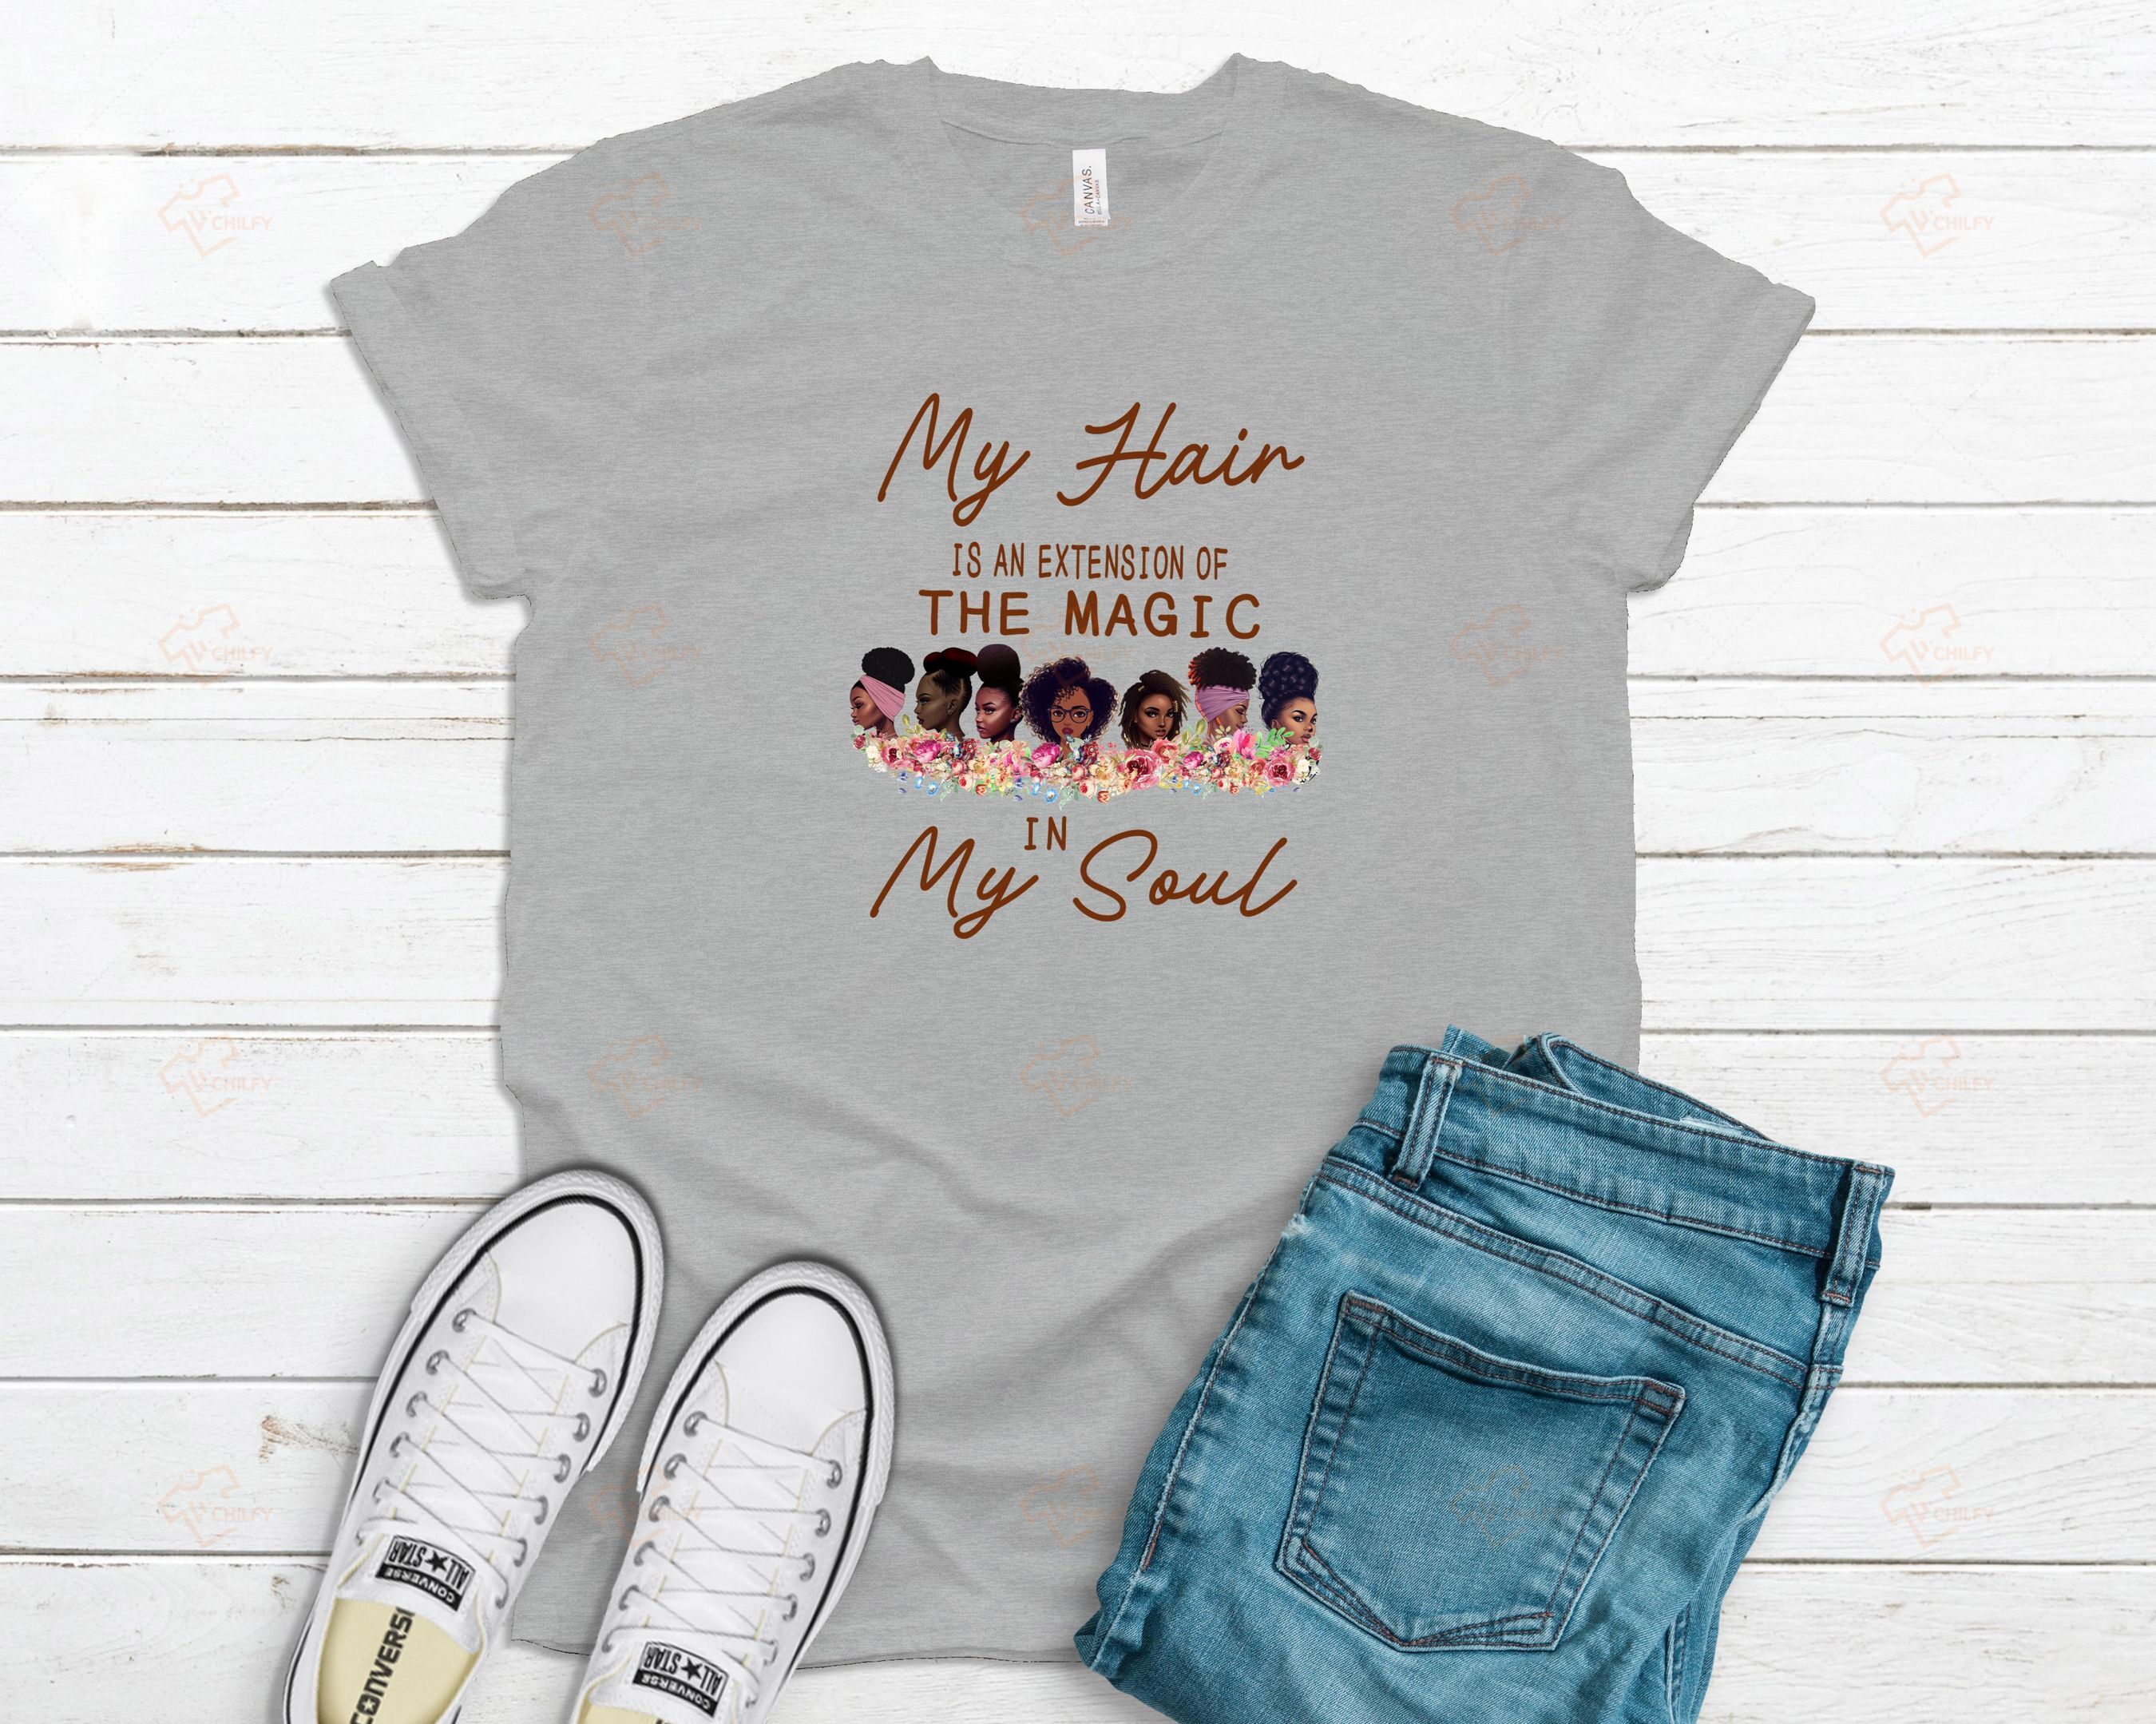 My hair is an extension of the magic in my soul shirt, natural hair shirt